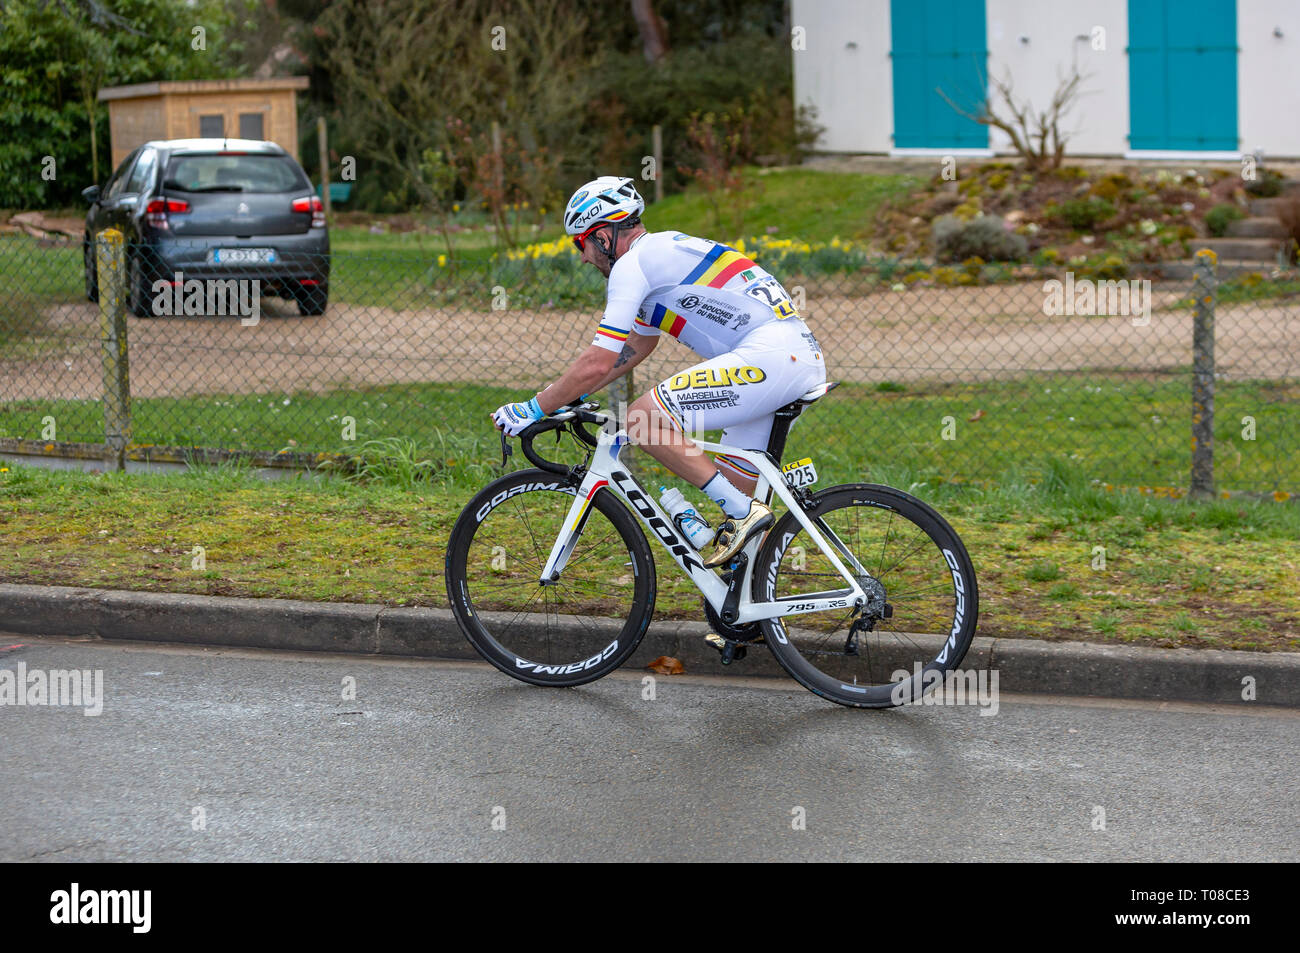 Beulle, France - March 10, 2019: The Romanian cyclist Eduard Grosu of Delko Marseille Provence Team riding on Cote de Beulle during the stage 1 of Par Stock Photo